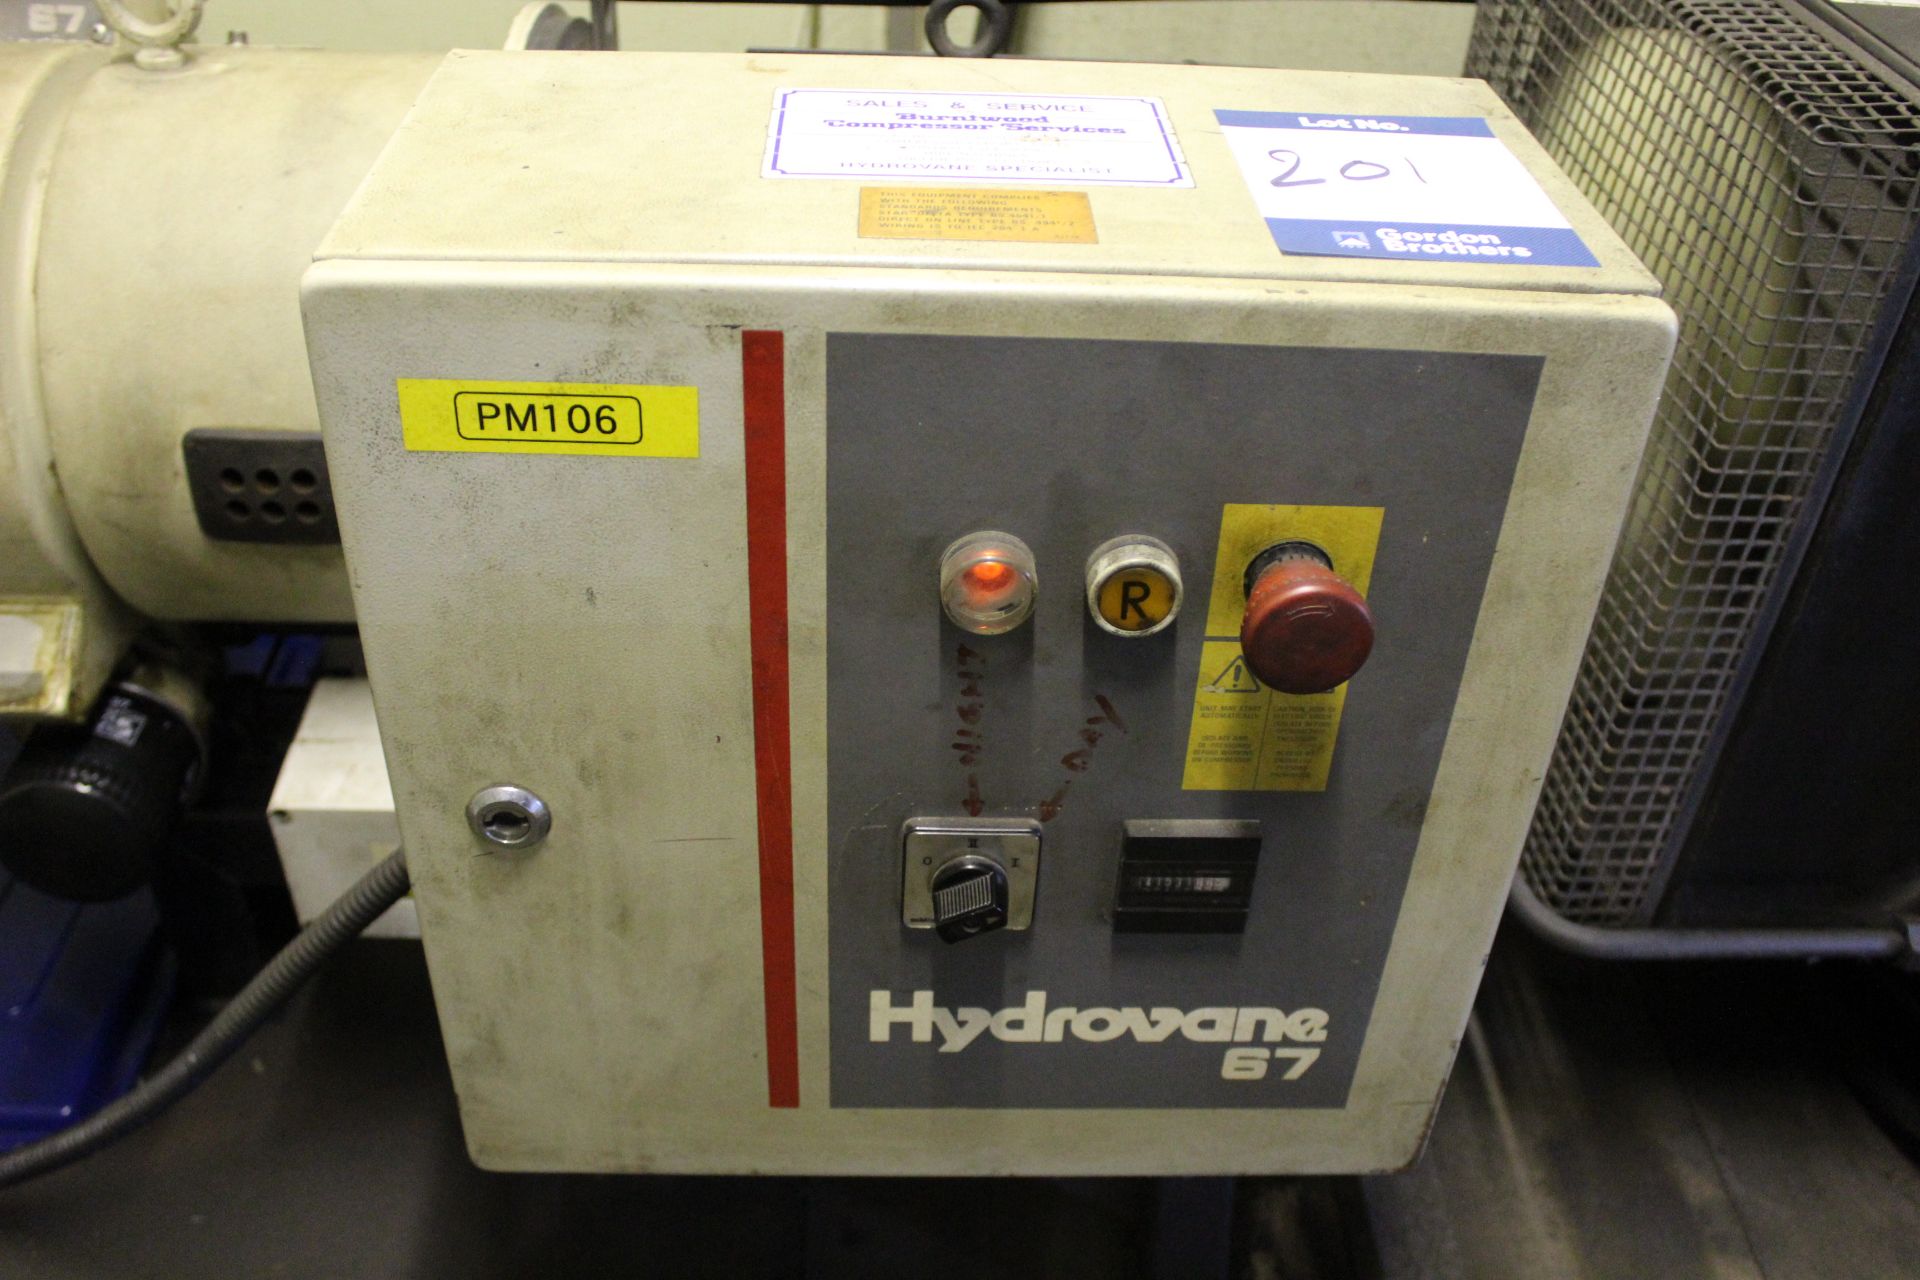 Hydrovane 67 Model: 06708-000 rotary vane air compressor, Serial No. 8909HV771304/3 with Abac Dry - Image 2 of 10